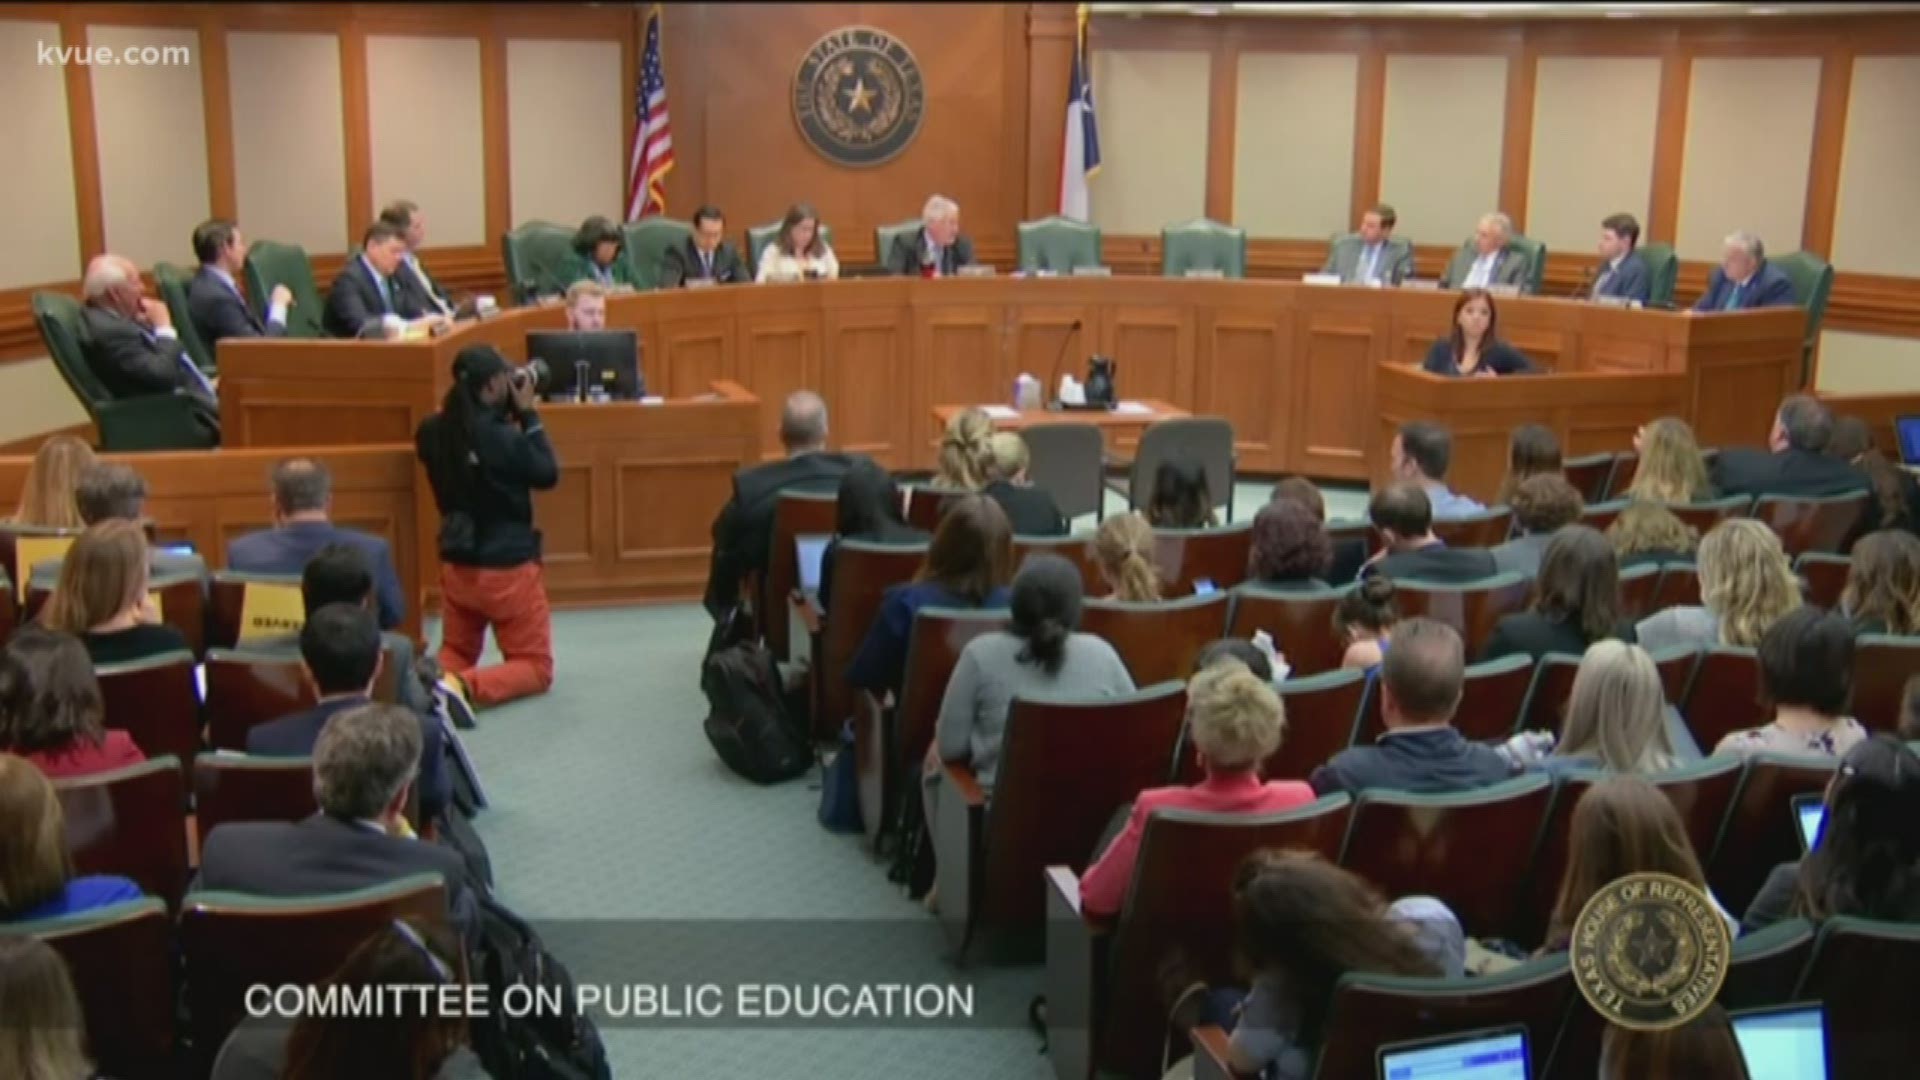 People are weighing in on the House's school finance reform bill. They call it "The Texas Plan." KVUE Political Reporter Ashley Goudeau is live at the Capitol to break down what's in the bill.